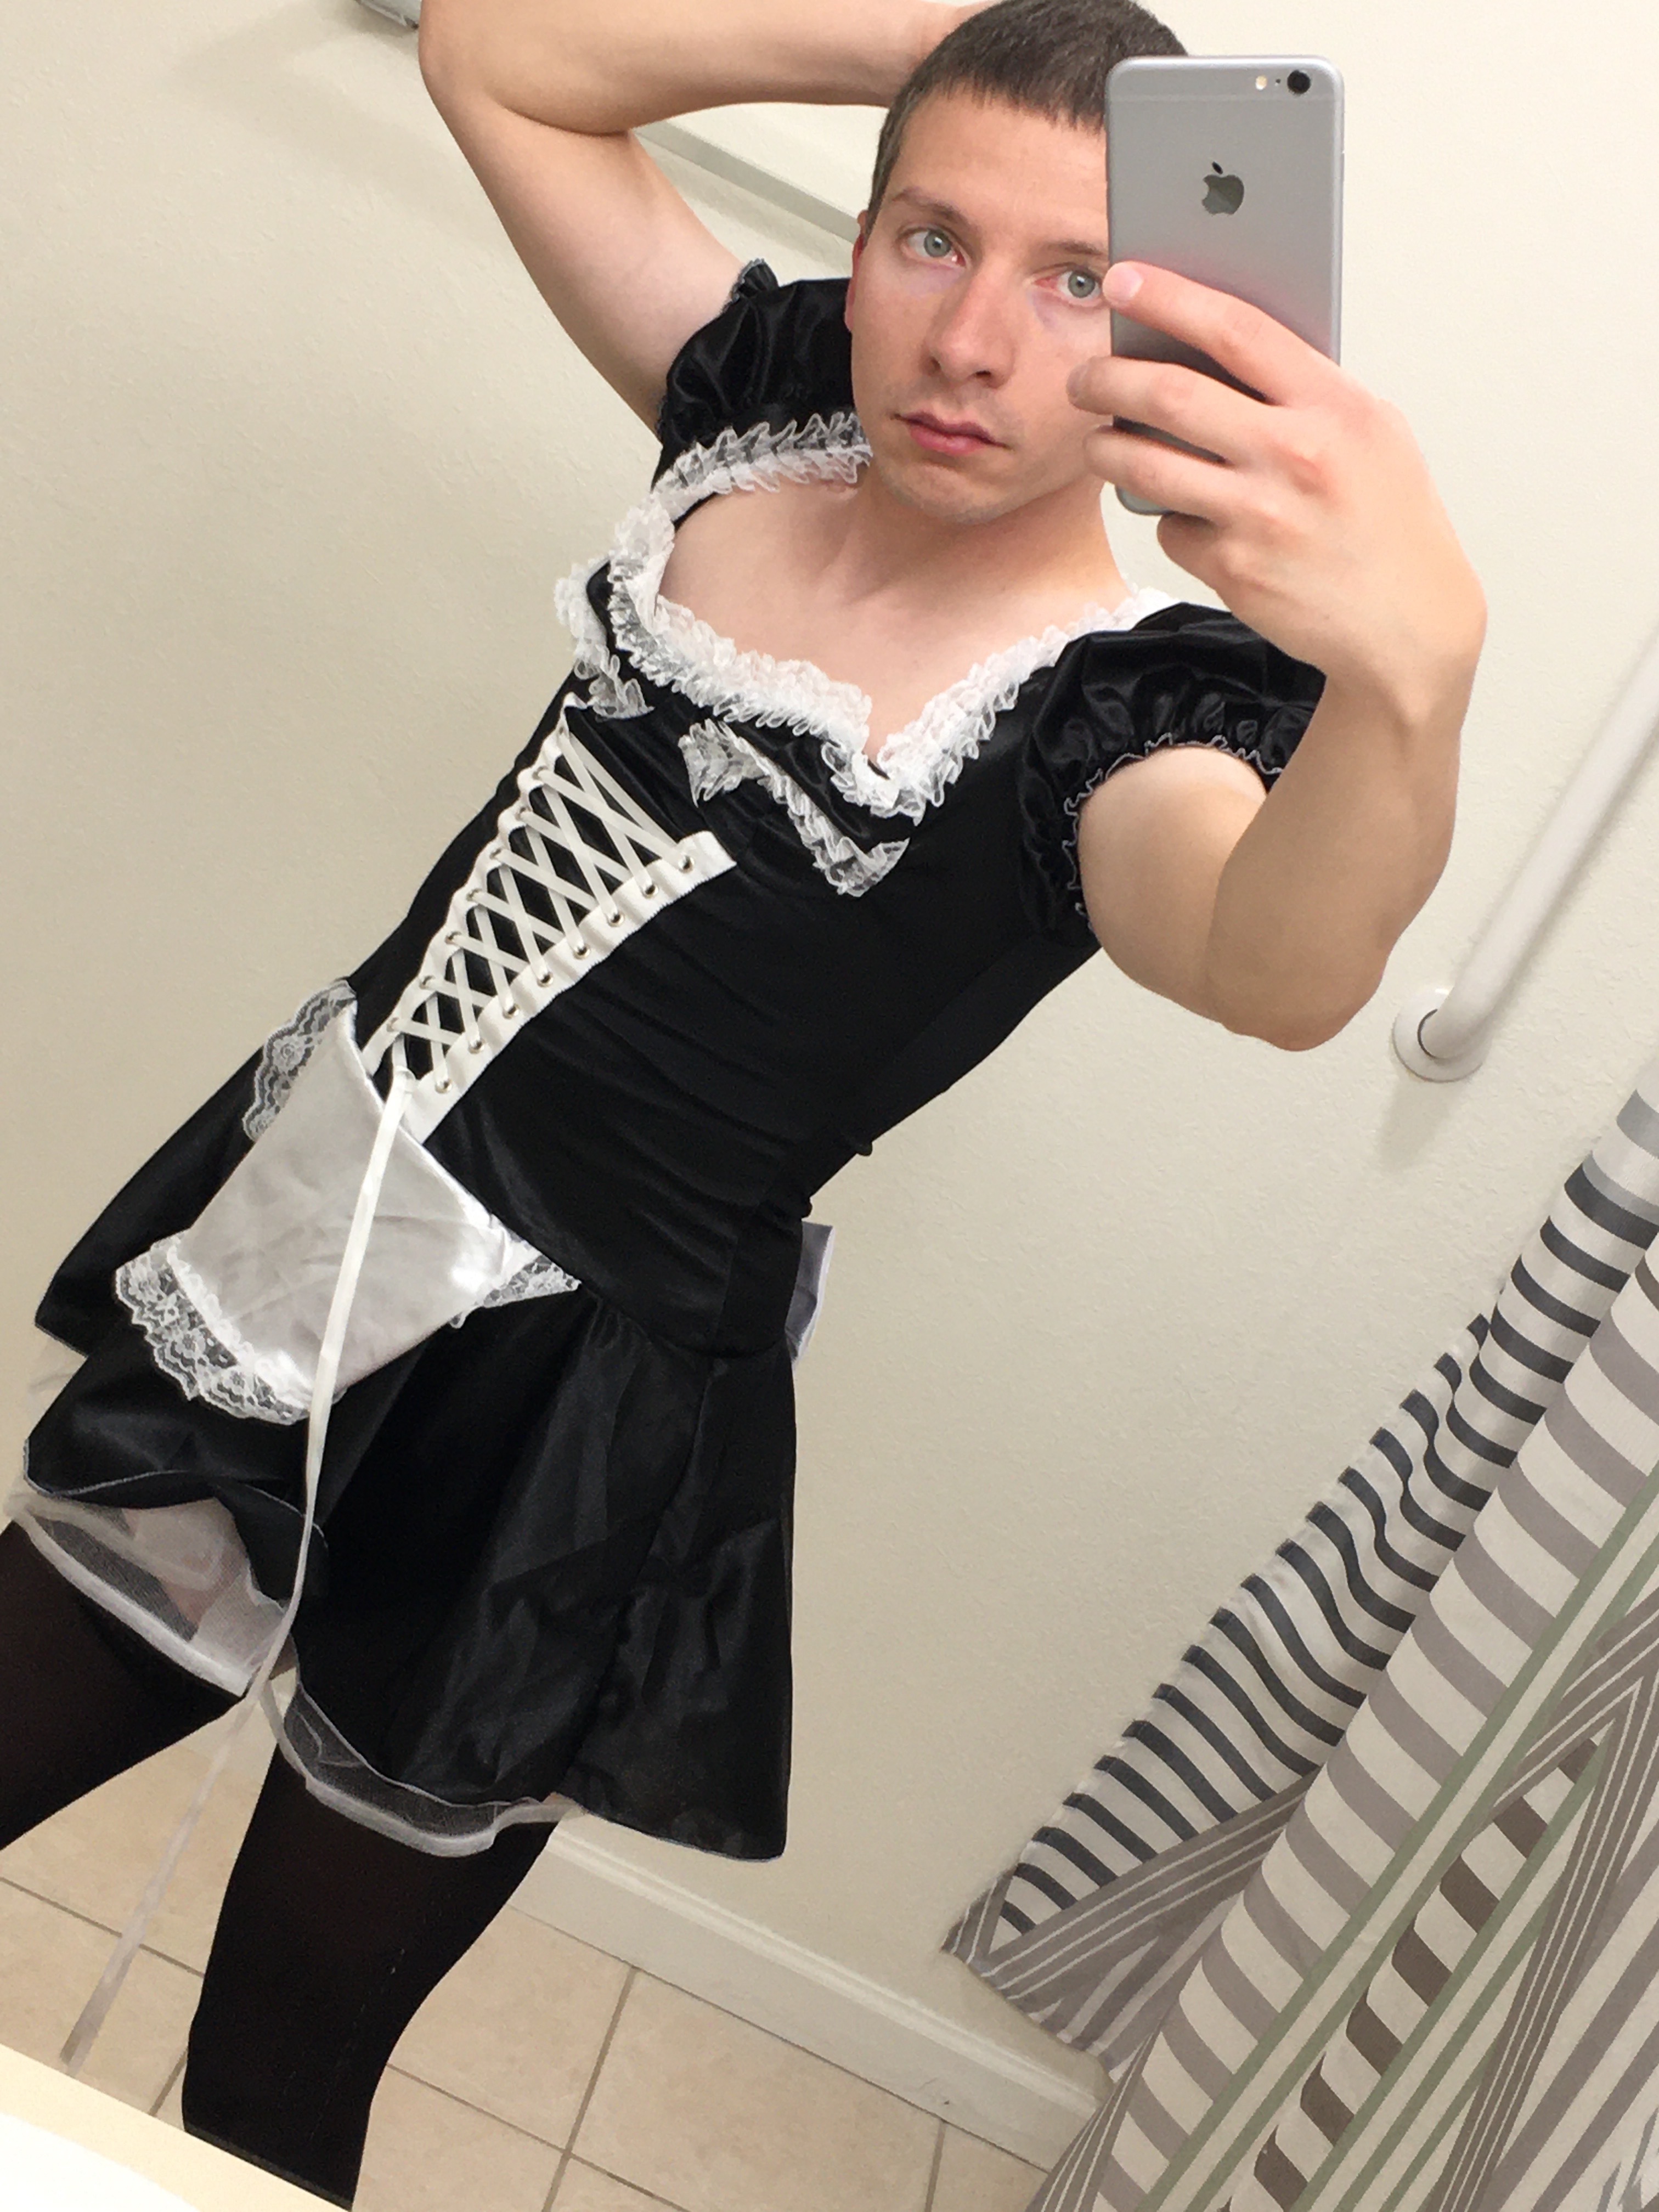 Brian wearing a french maid dress (7/7)